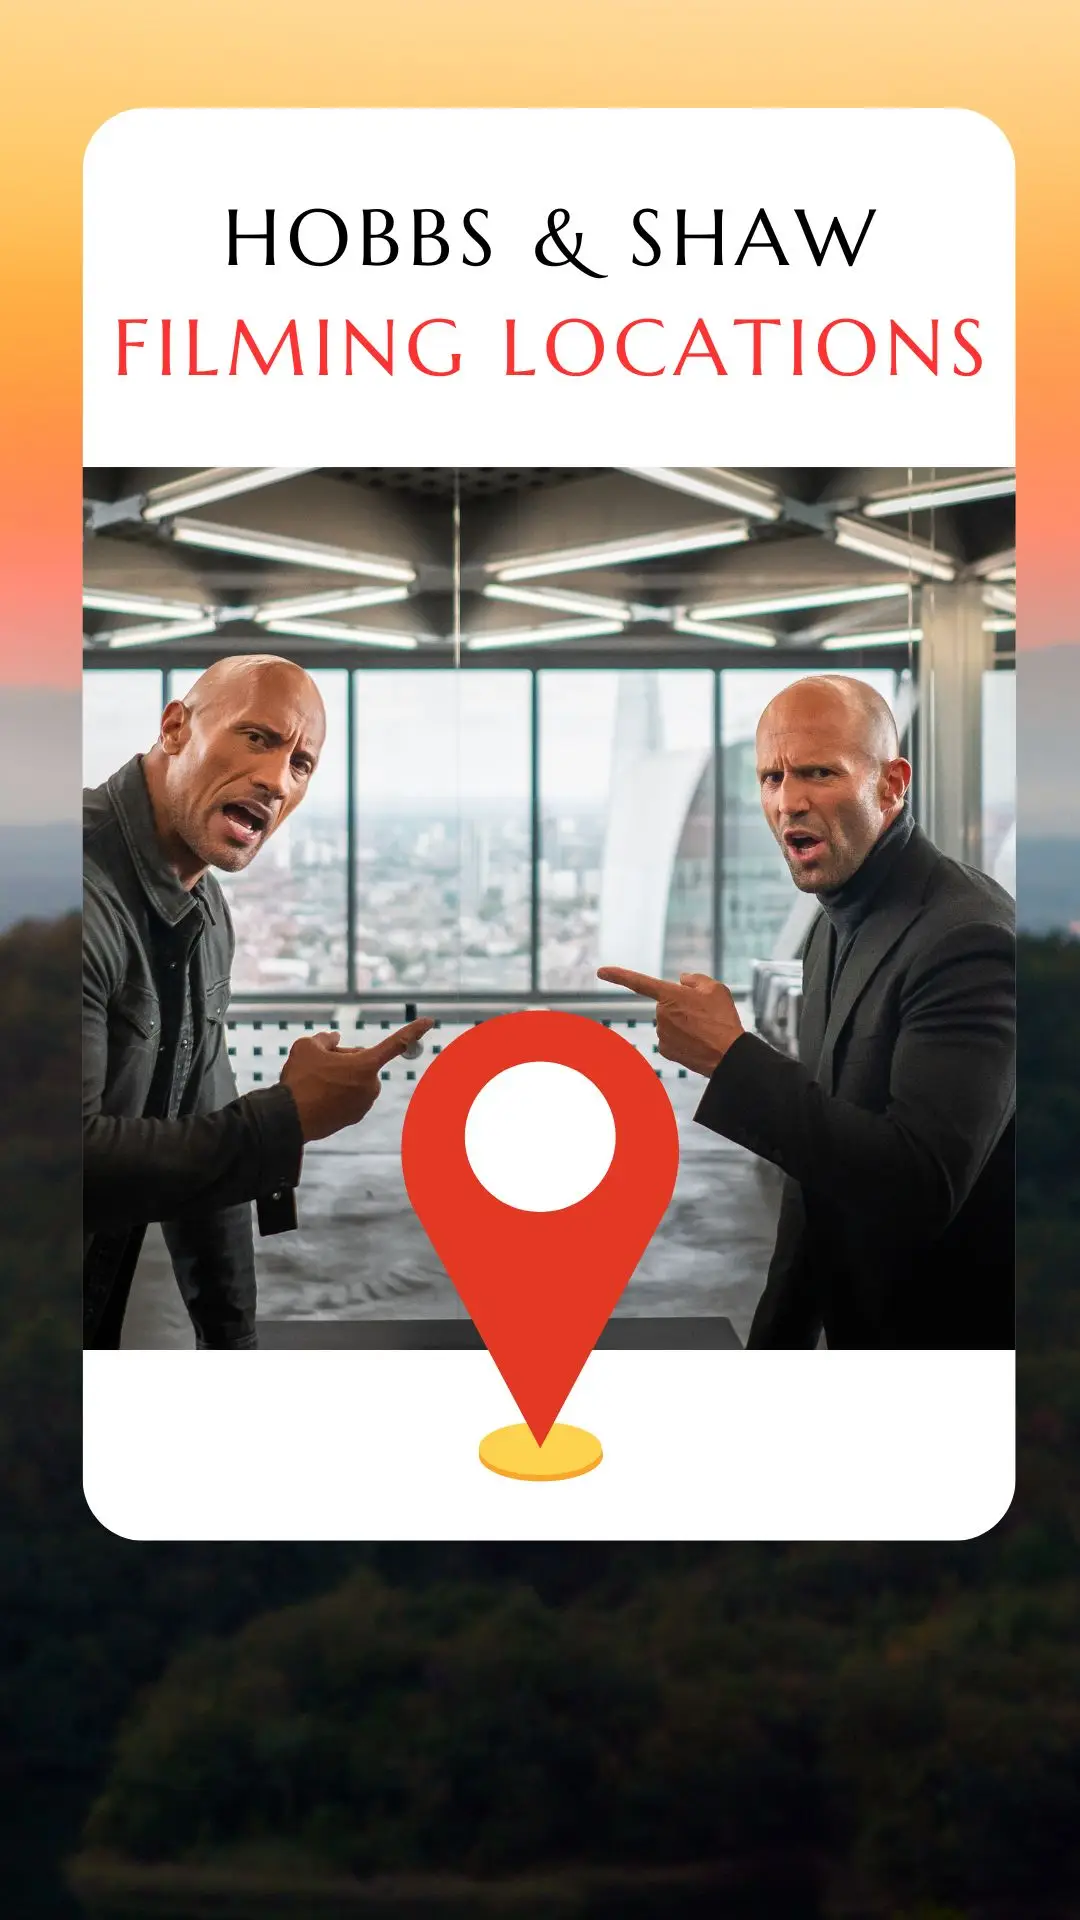 Hobbs & Shaw Filming Locations